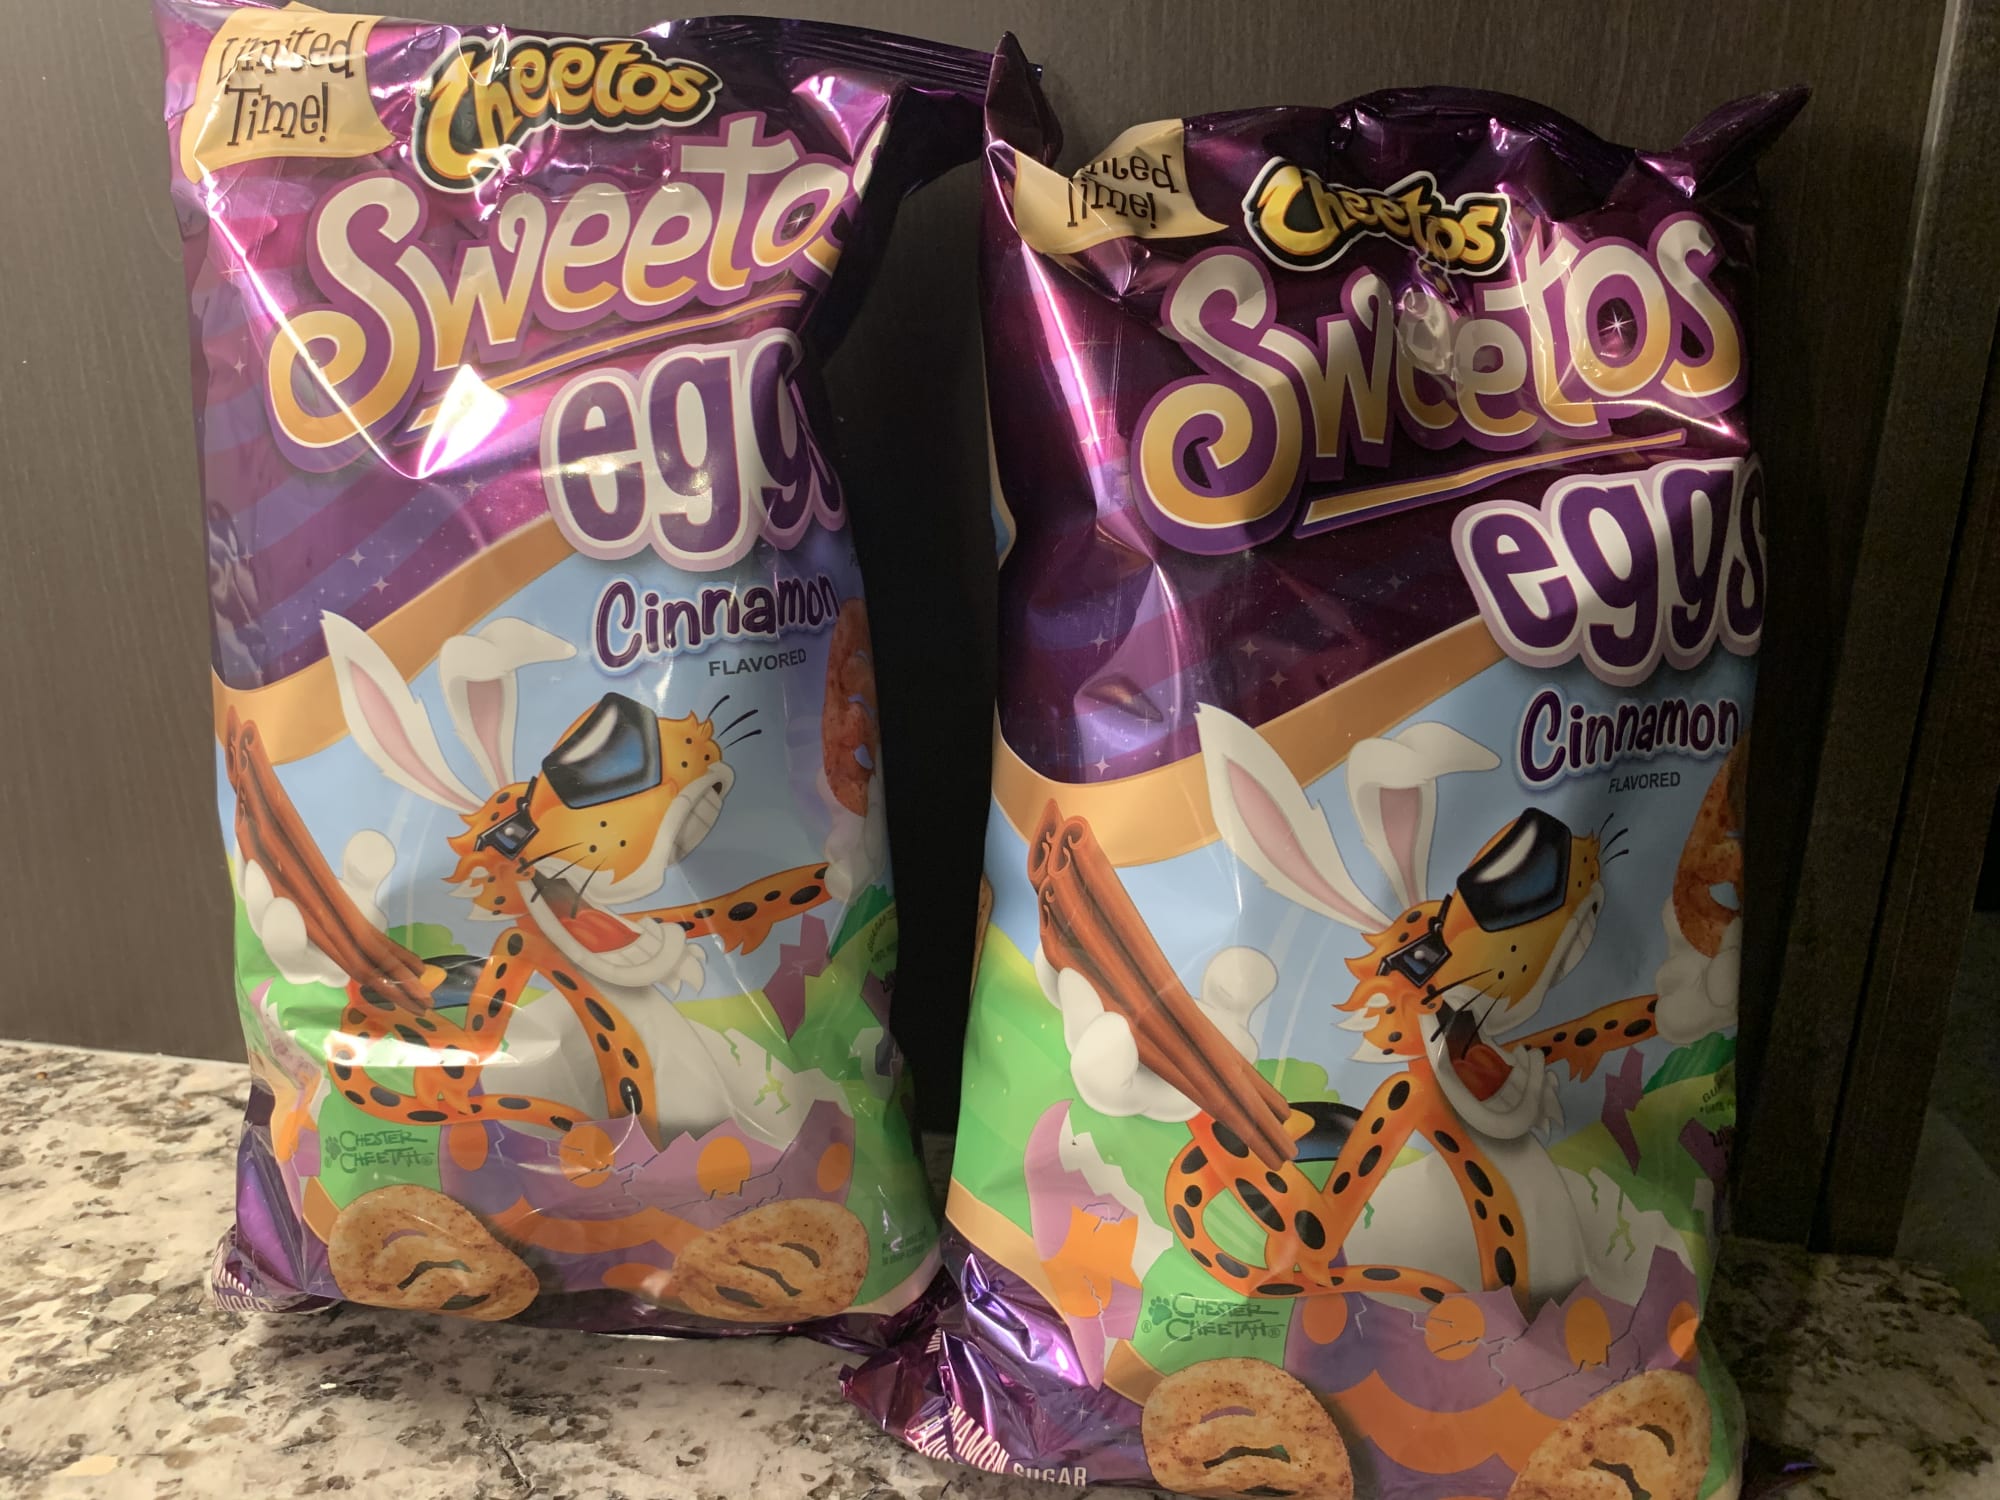 Cheetos Sweetos Cinnamon Eggs have returned and are delicious as ever